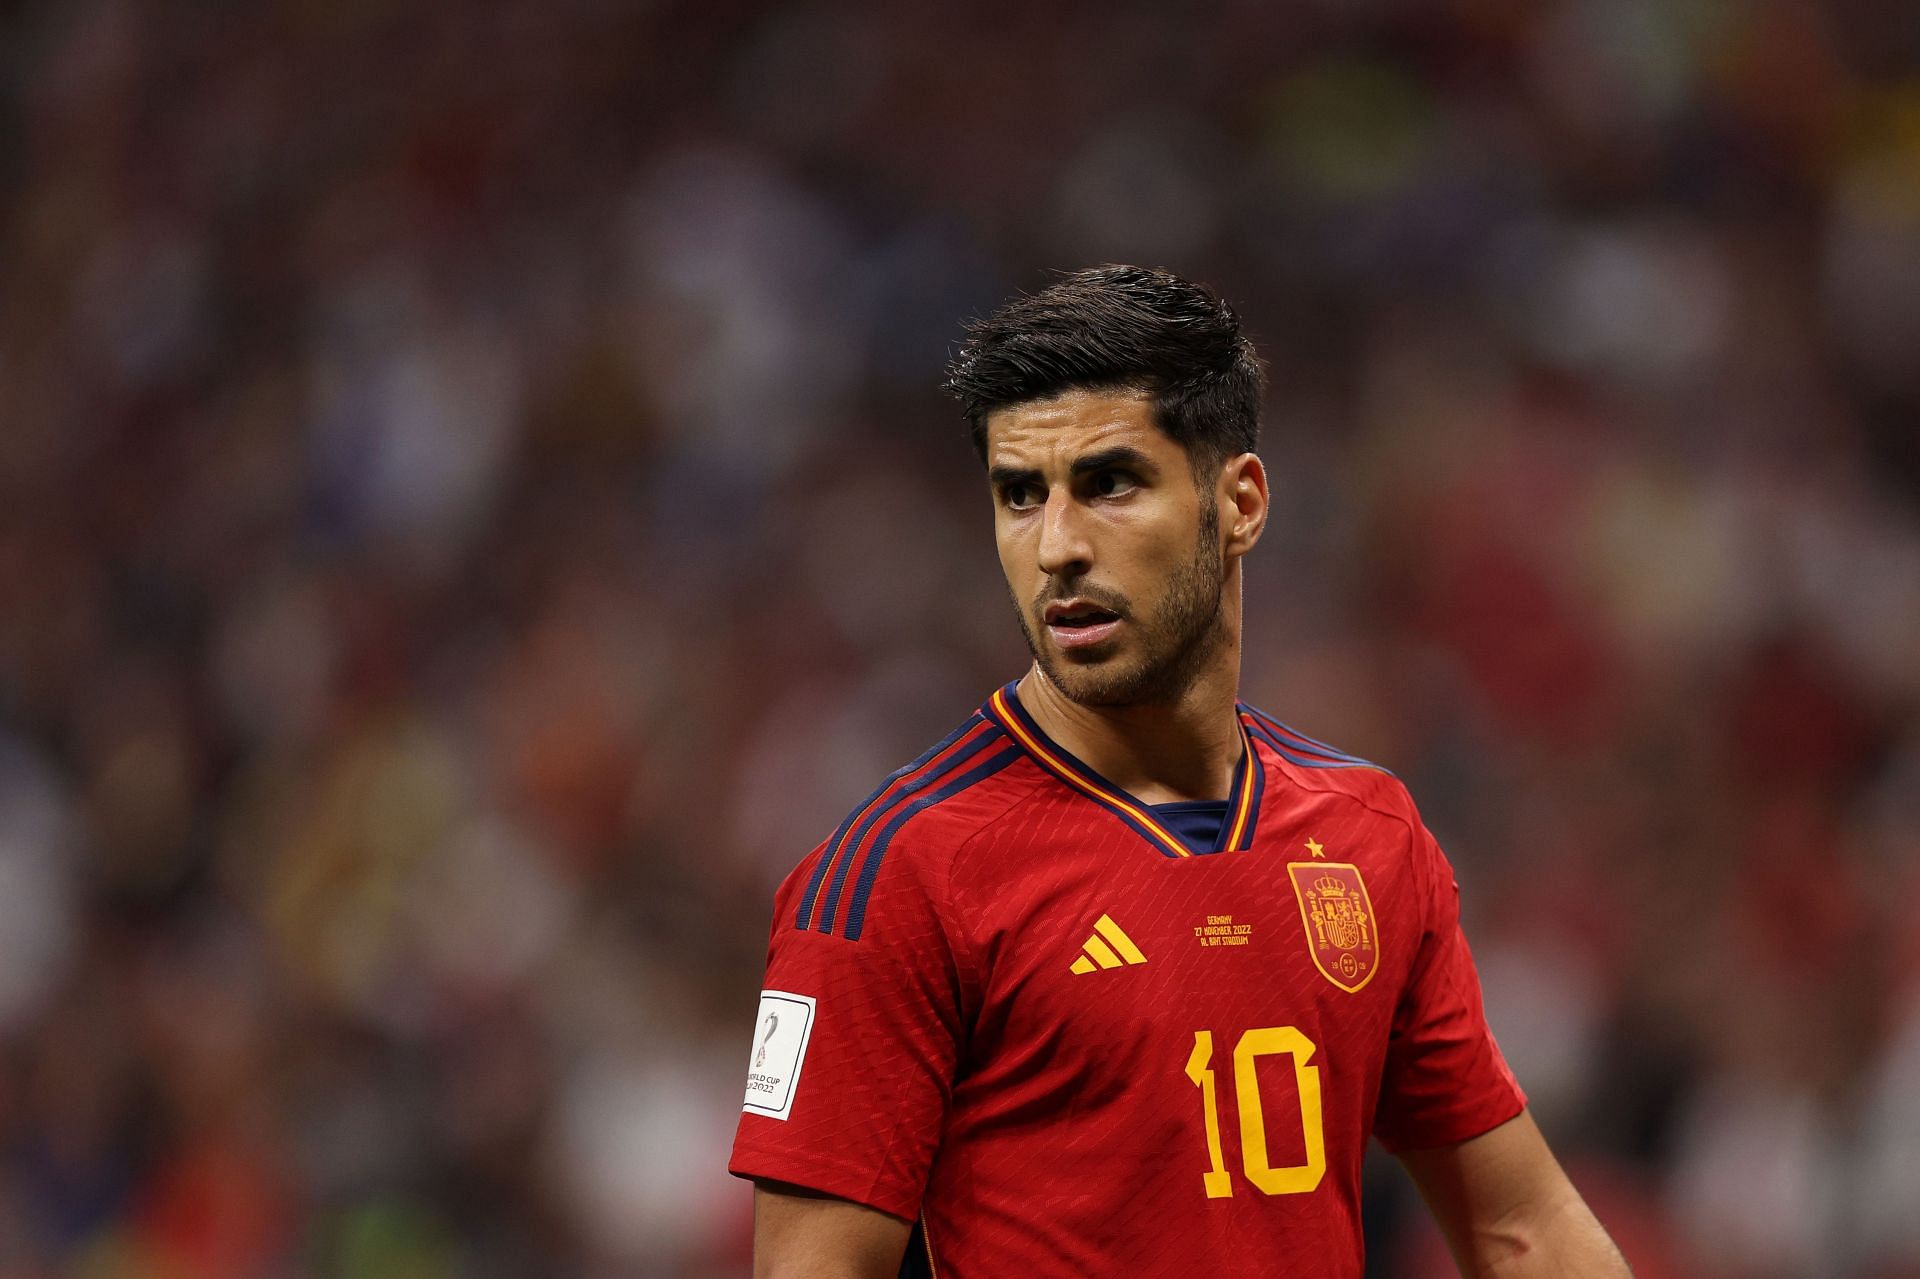 Marco Asensio has been in and out of the team of late.